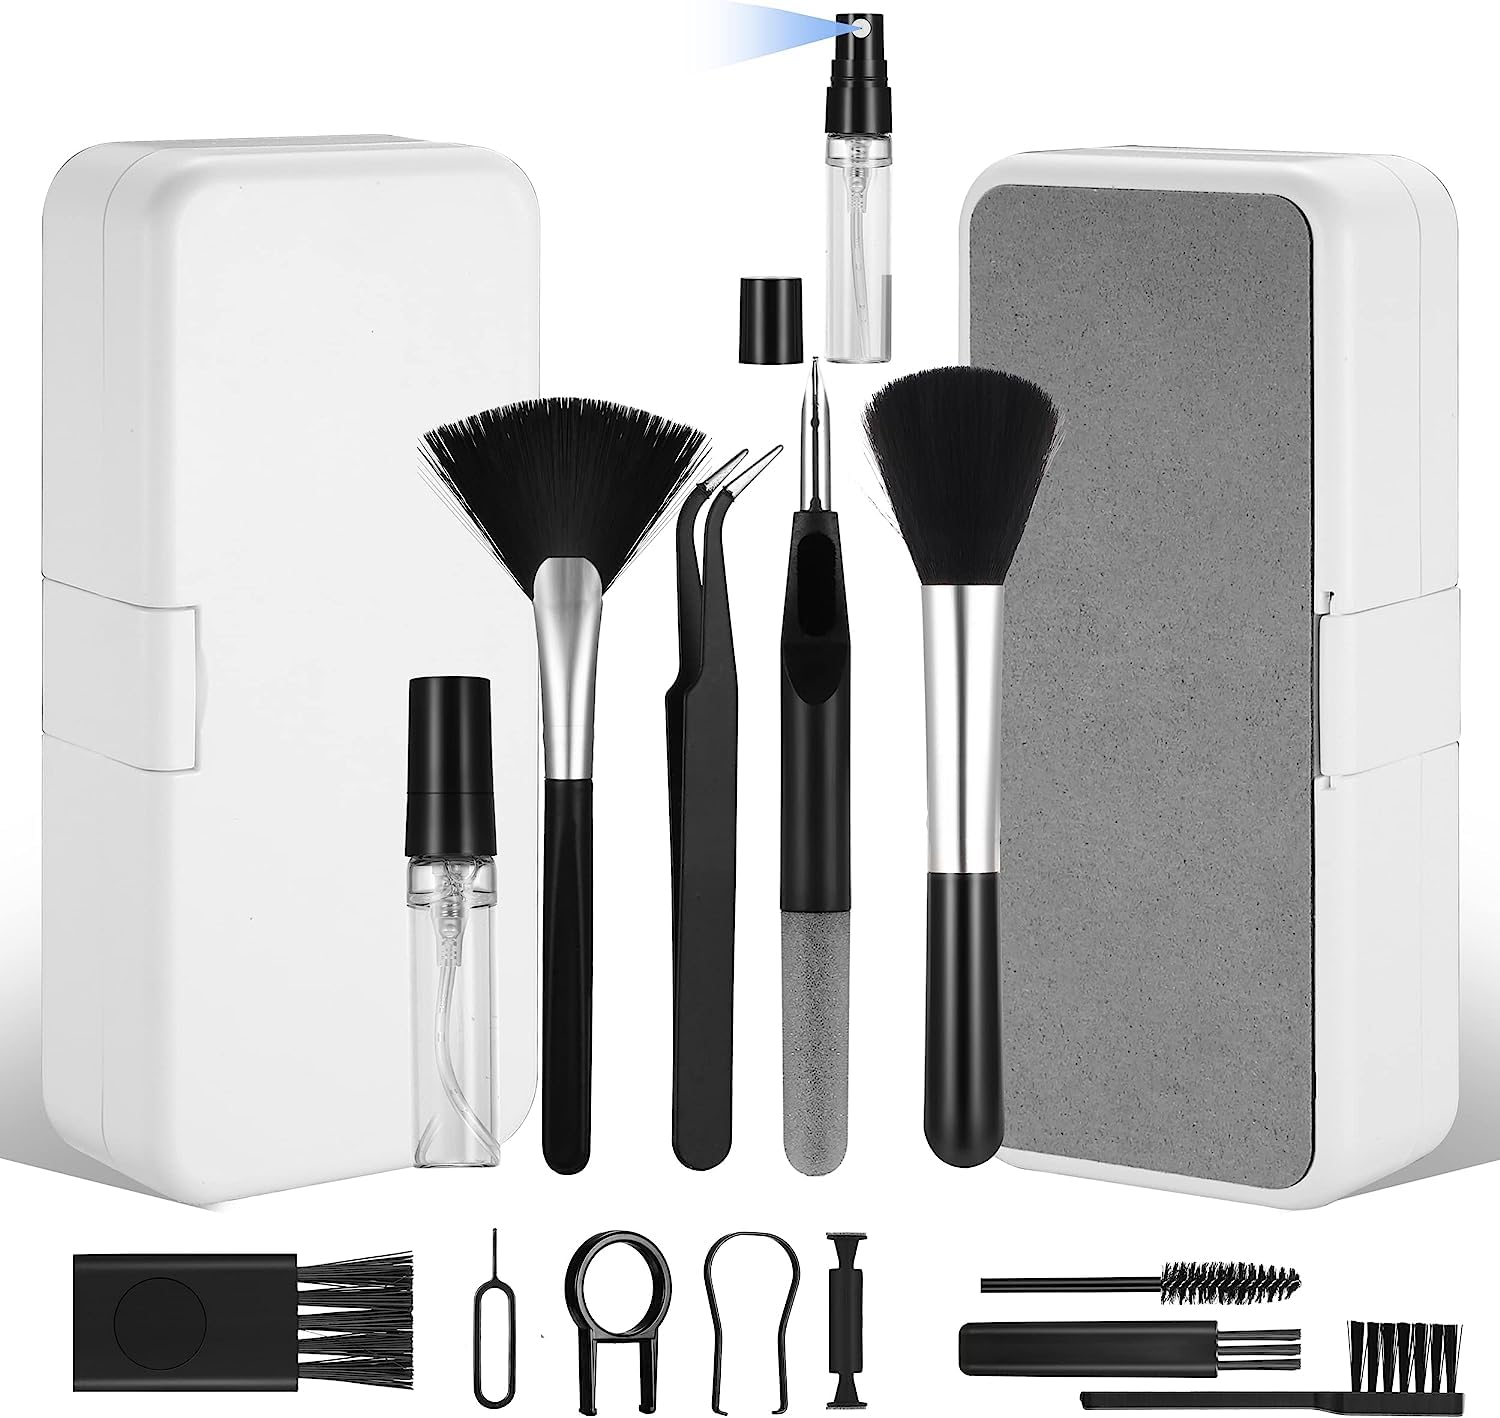 SkyShopy 18 in 1 Electronic Cleaner Kit with 3 in 1 Cleaning Pen,Laptop Screen Keyboard Cleaning Kit,Computer Cleaning Kit, 18-in-1 Cleaning Kit for Gadgets, Airpods, Mobile, Tablet, Laptop, Computer